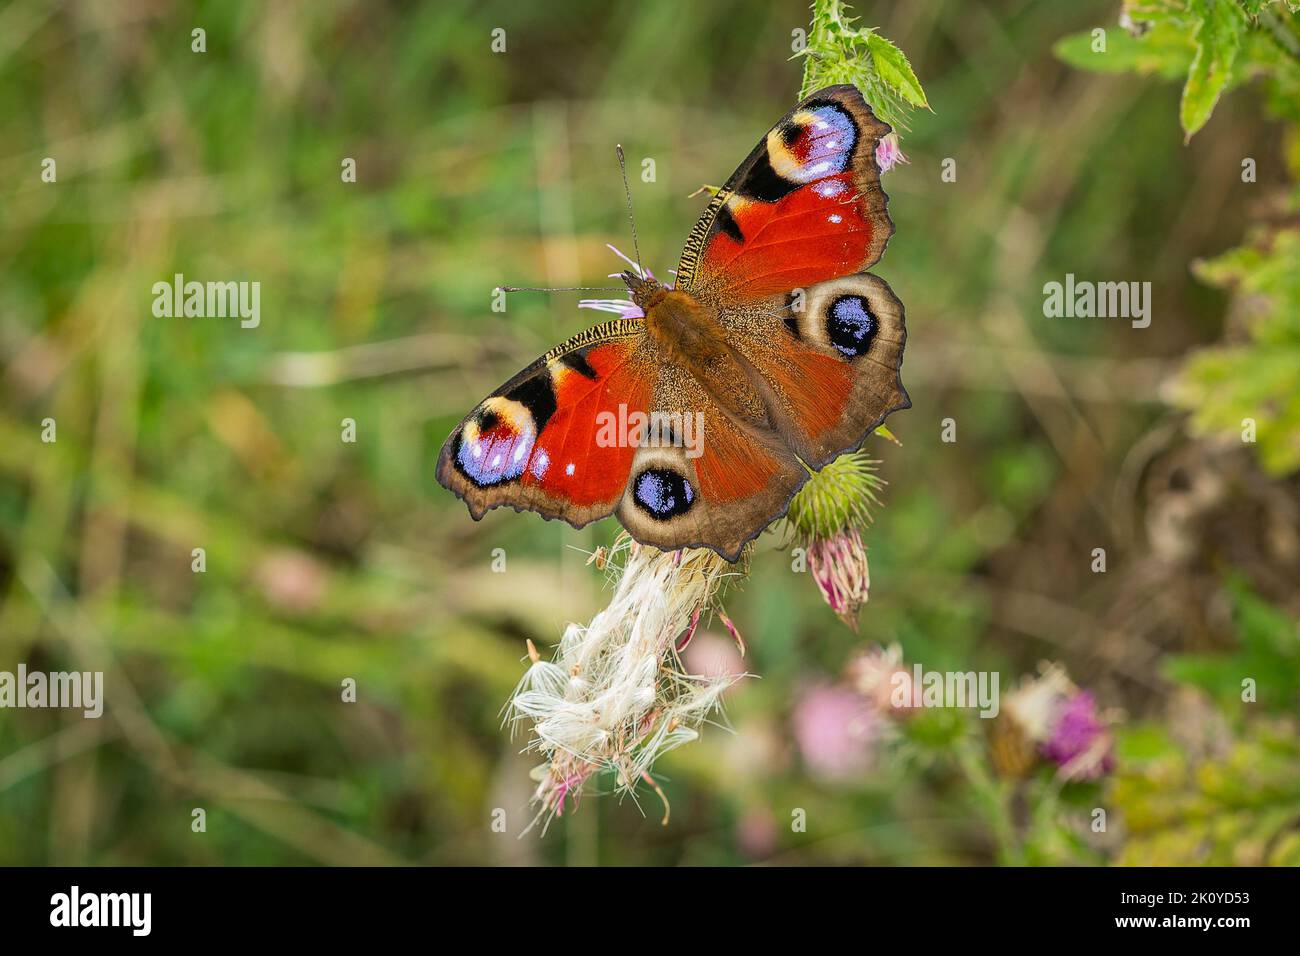 The colourful peacock butterfly with red, violet, purple, black and blue colours sitting on a weed flower. Blurry green background. Stock Photo